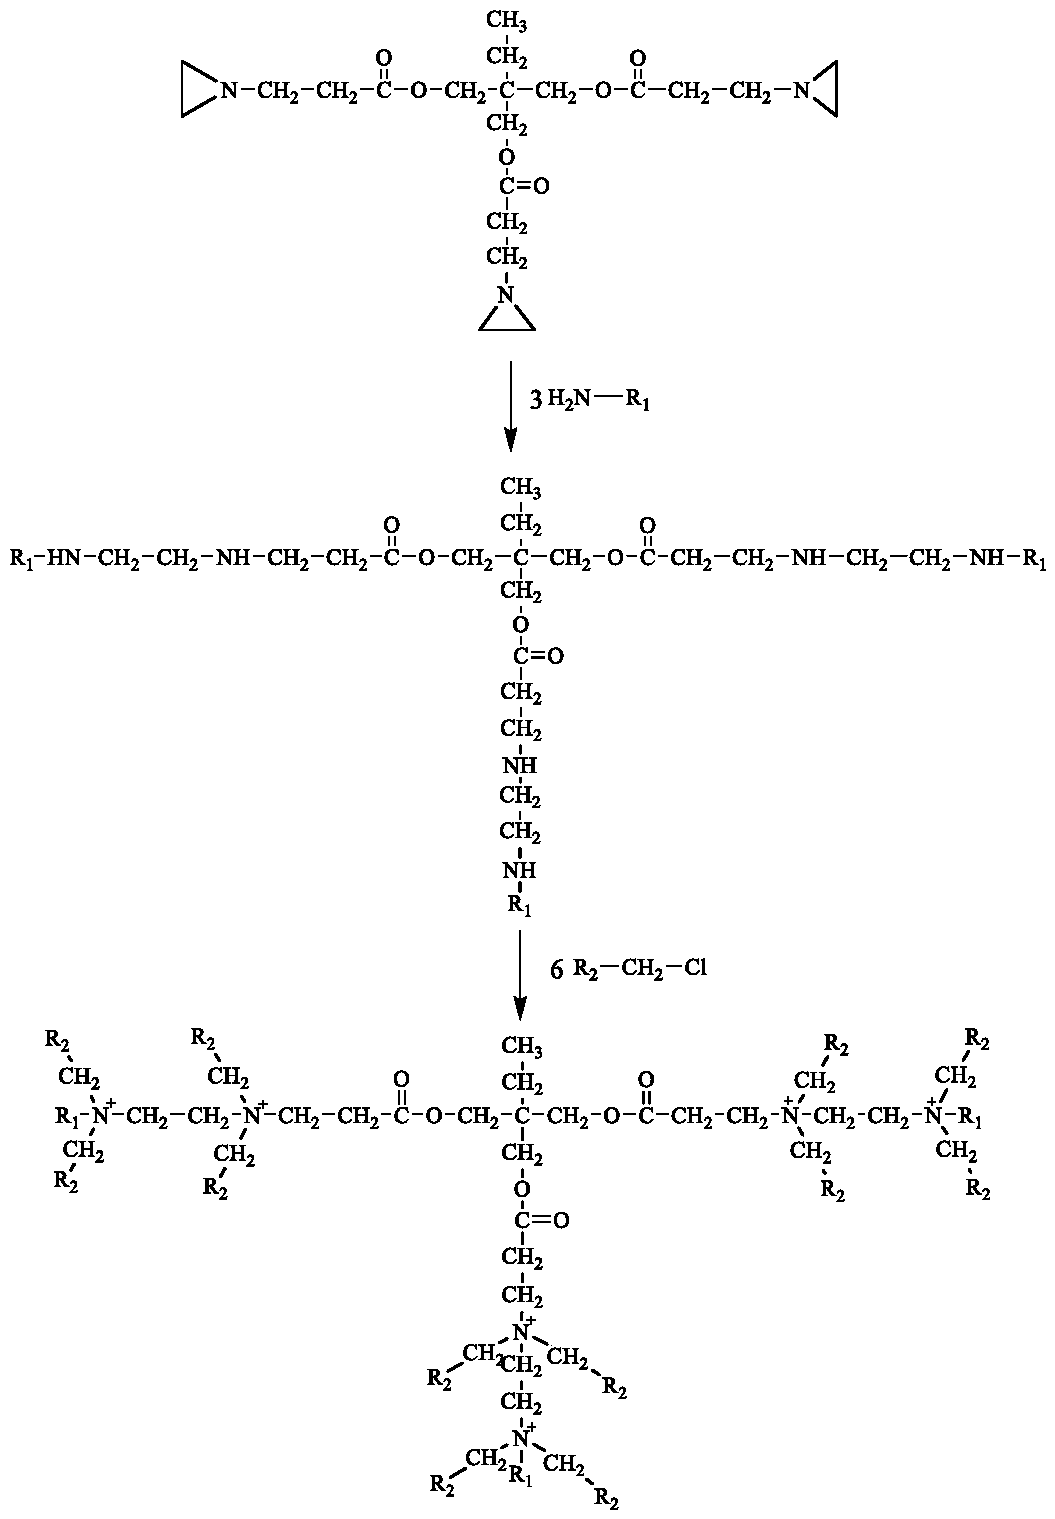 Application of a star-shaped polycation-based compound as a fungicide